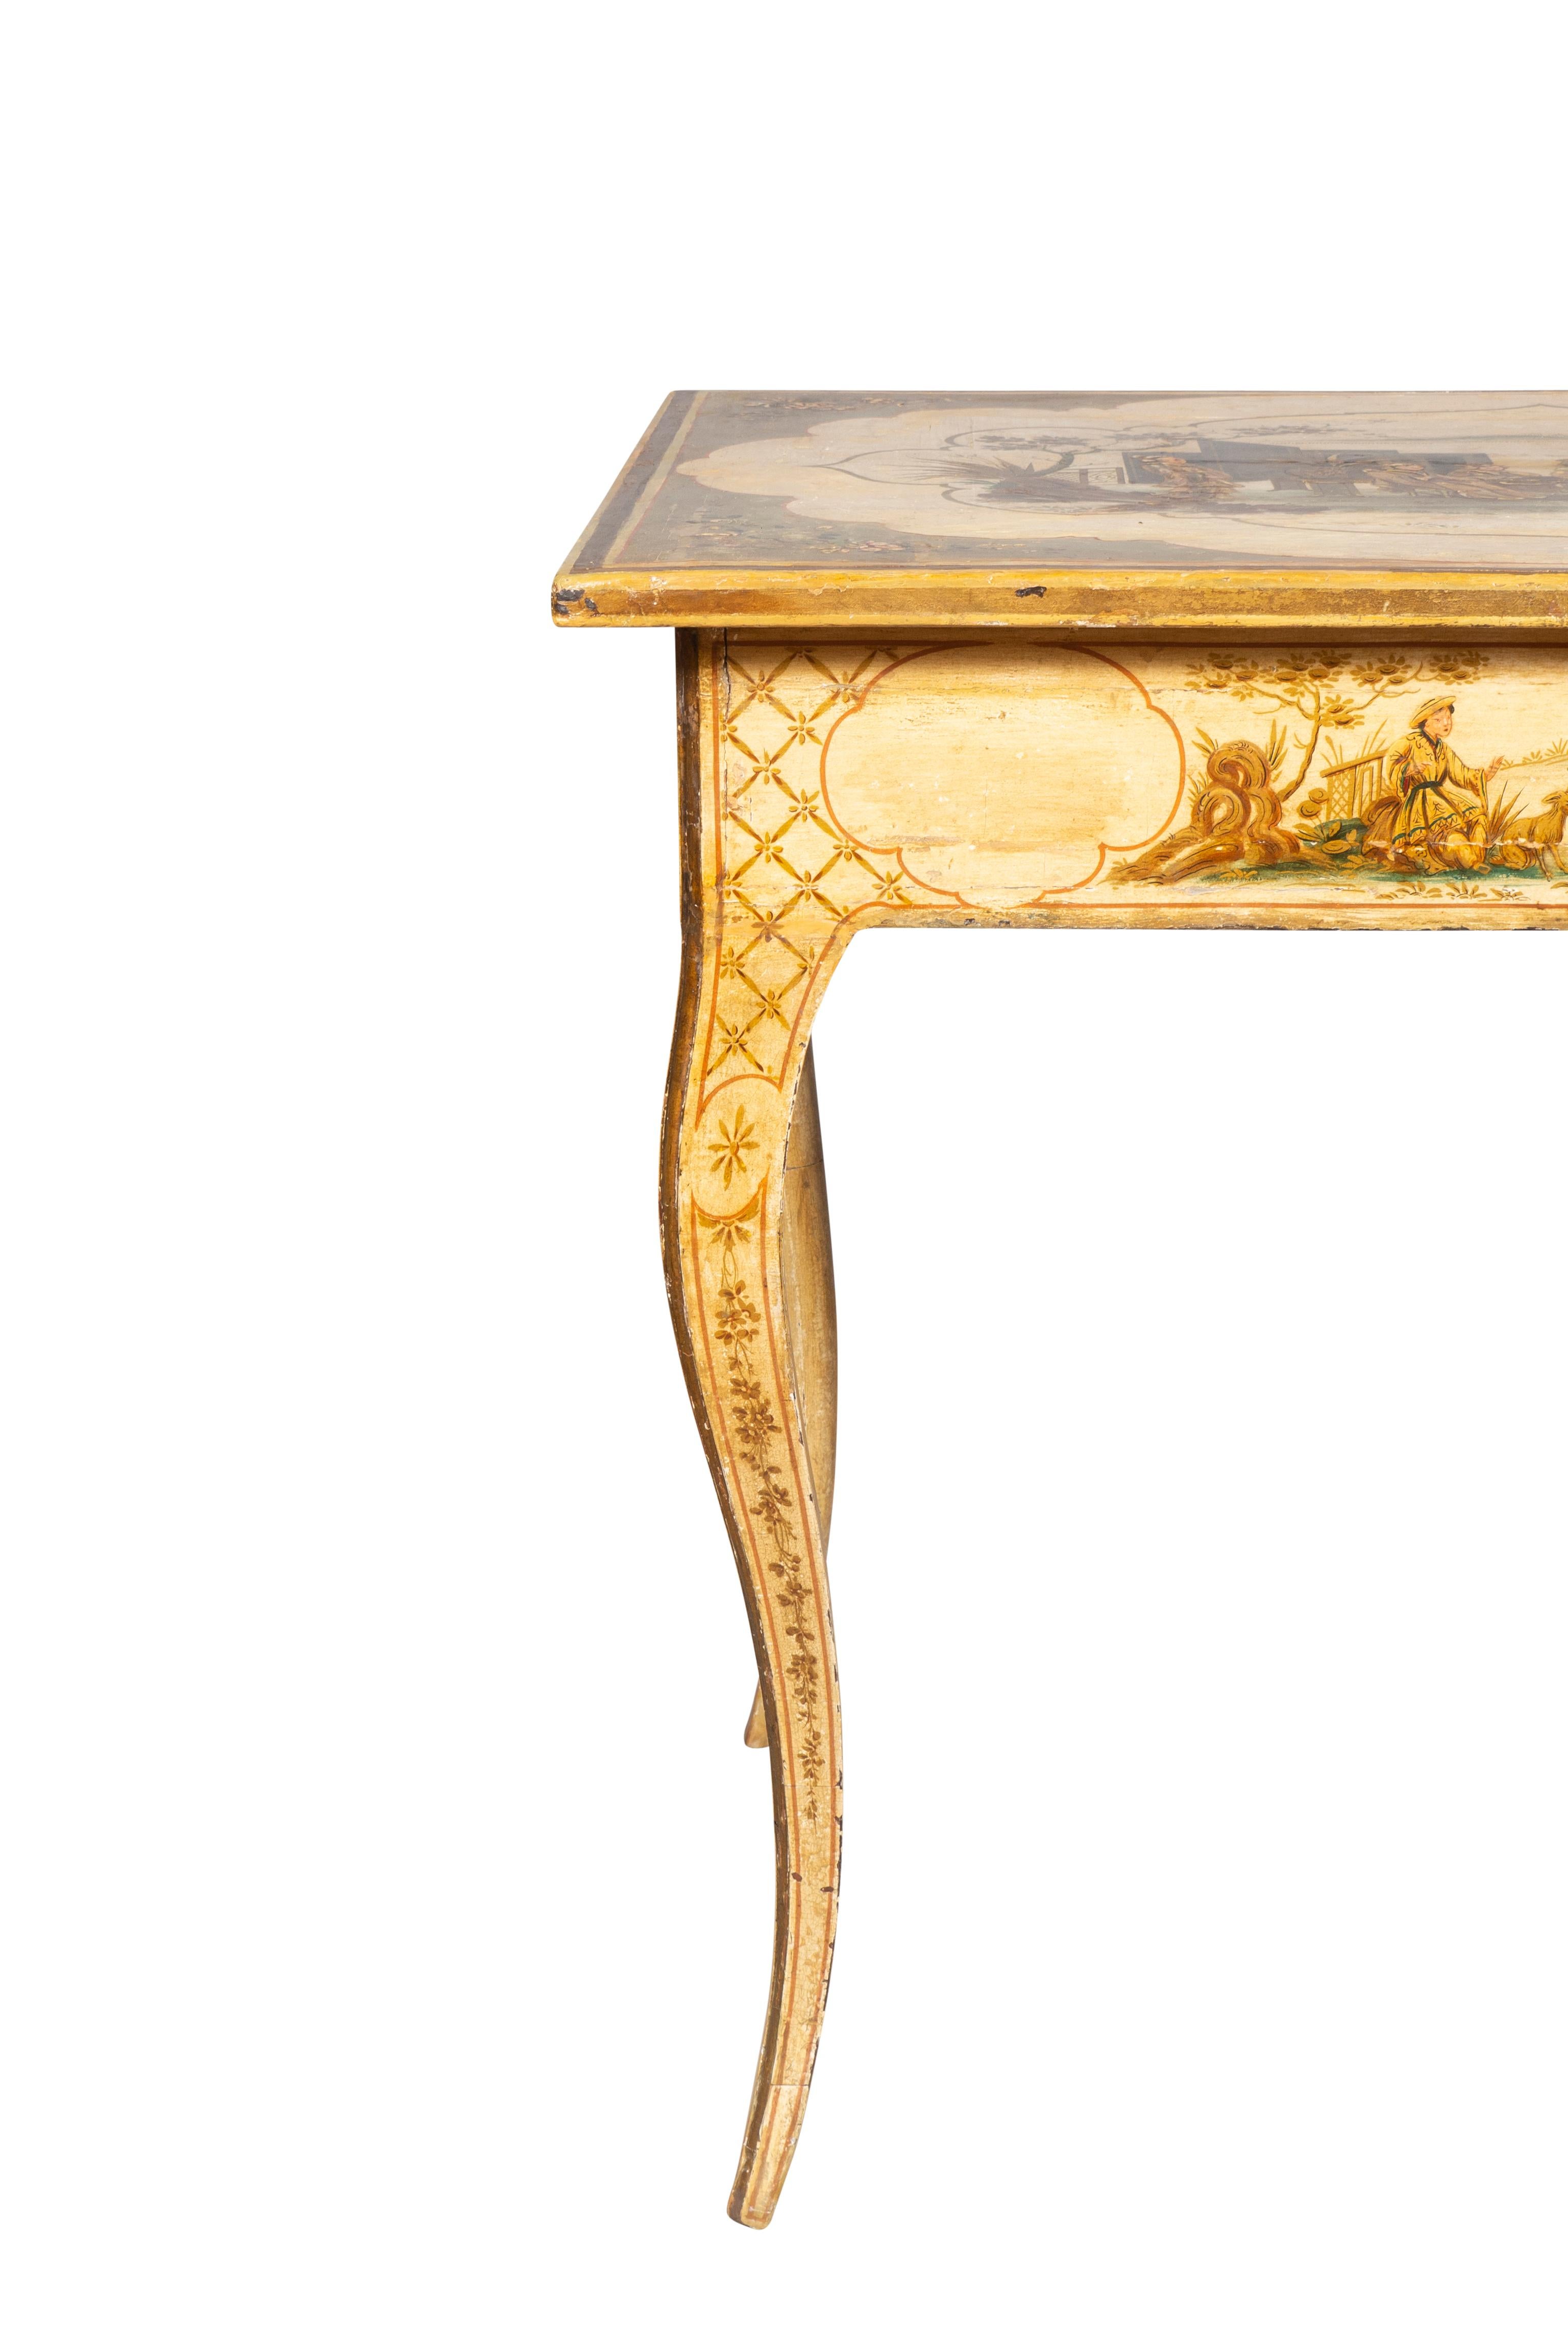 Italian Rococo Chinoiserie Decorated Table For Sale 6